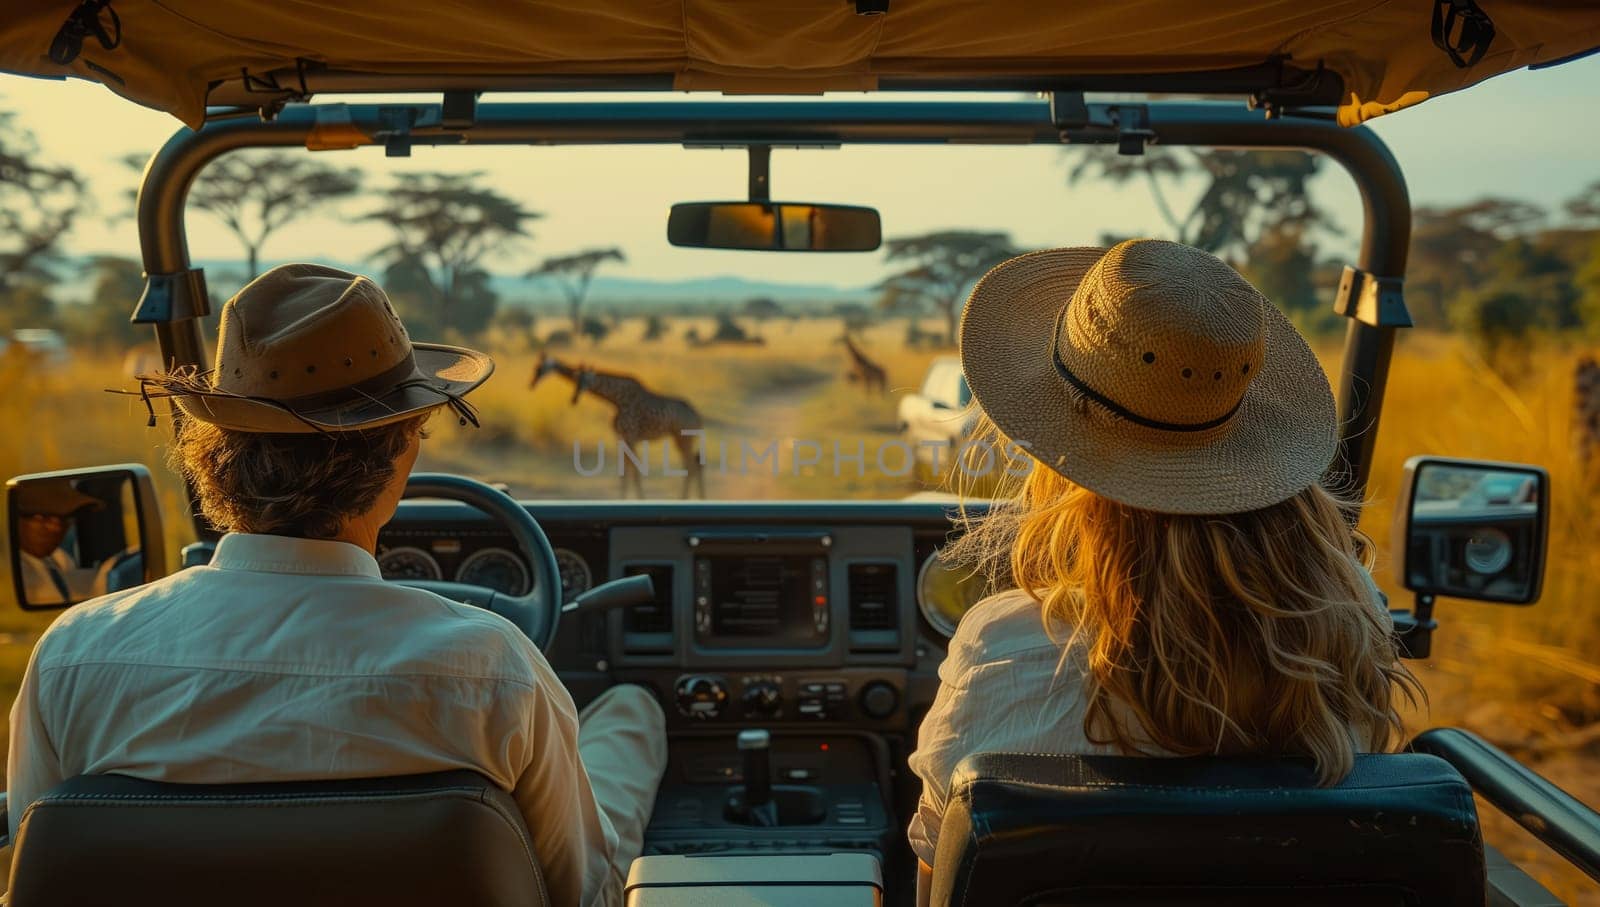 A man and a woman are seated in a car, observing giraffes from their vehicles window. The automotive mirror reflects the majestic animals as they travel through the safari